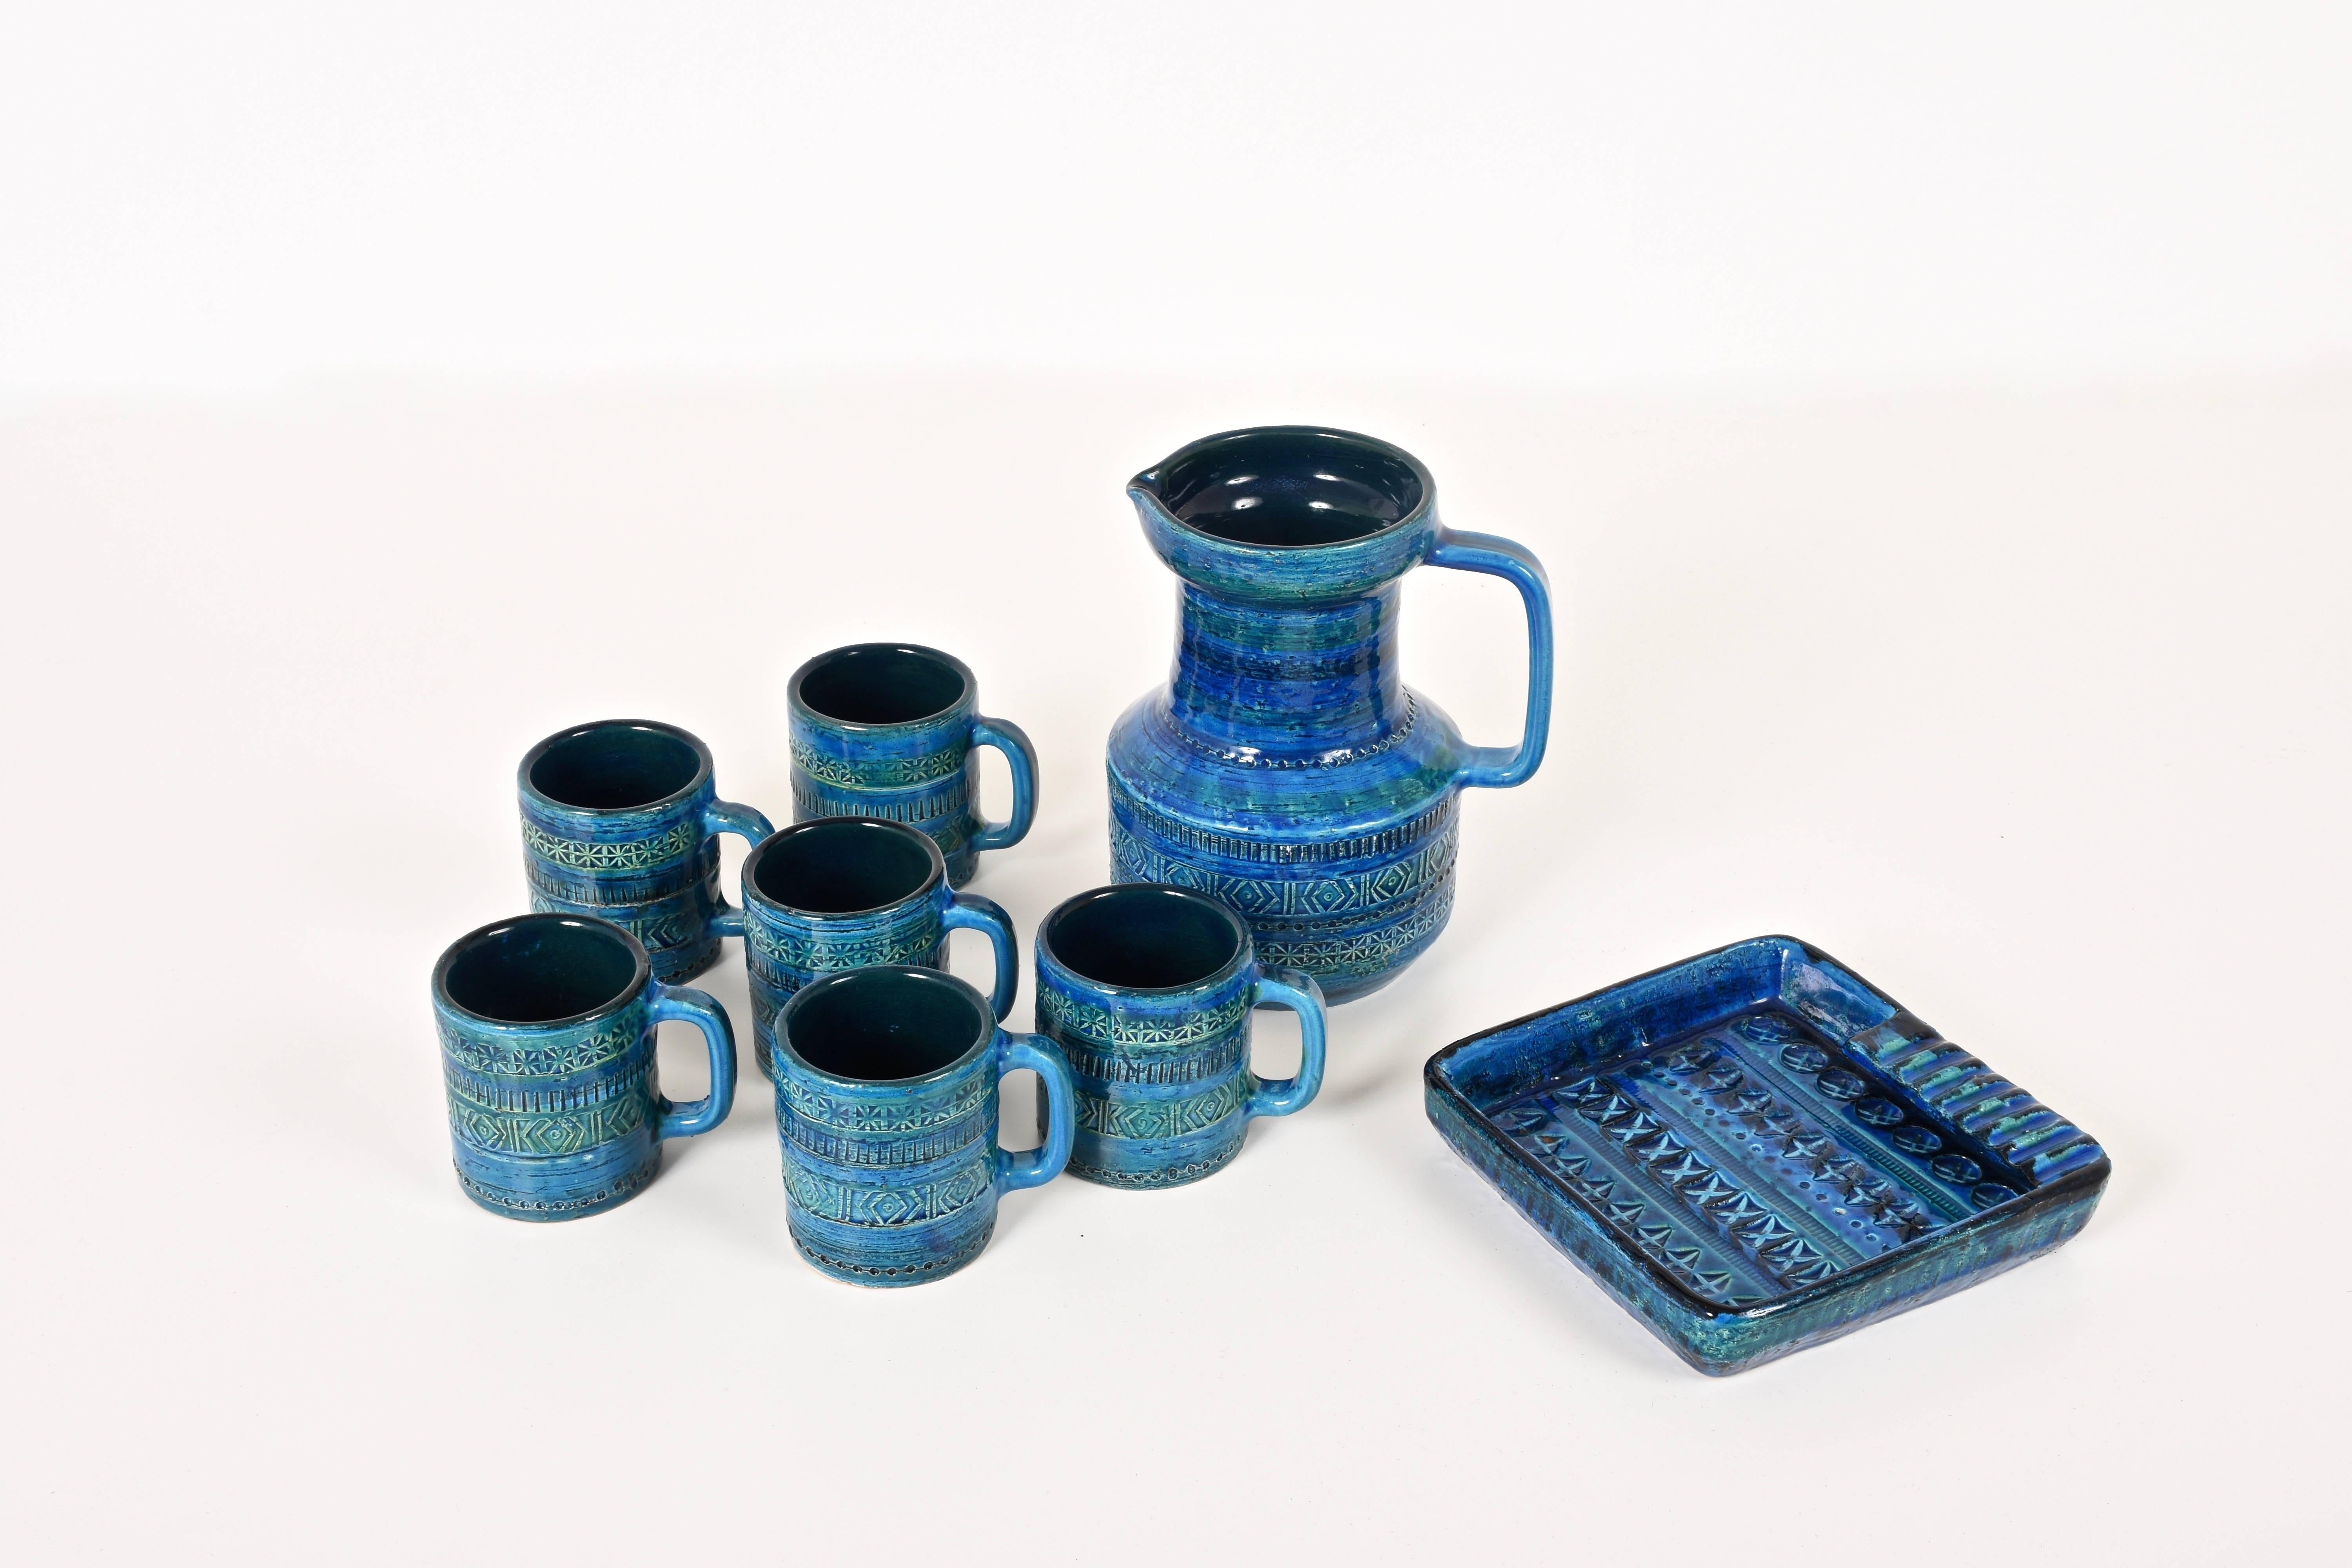 Large Rimini blue, blue glazed terracotta ceramic ashtray design by Aldo Londi and manufactured by Bitossi. Handcrafted in Italy with hand-carved geometric design and in a glazed vibrant turquoise and cobalt blue, Italy, 1950s-1960s. Marked Italy at